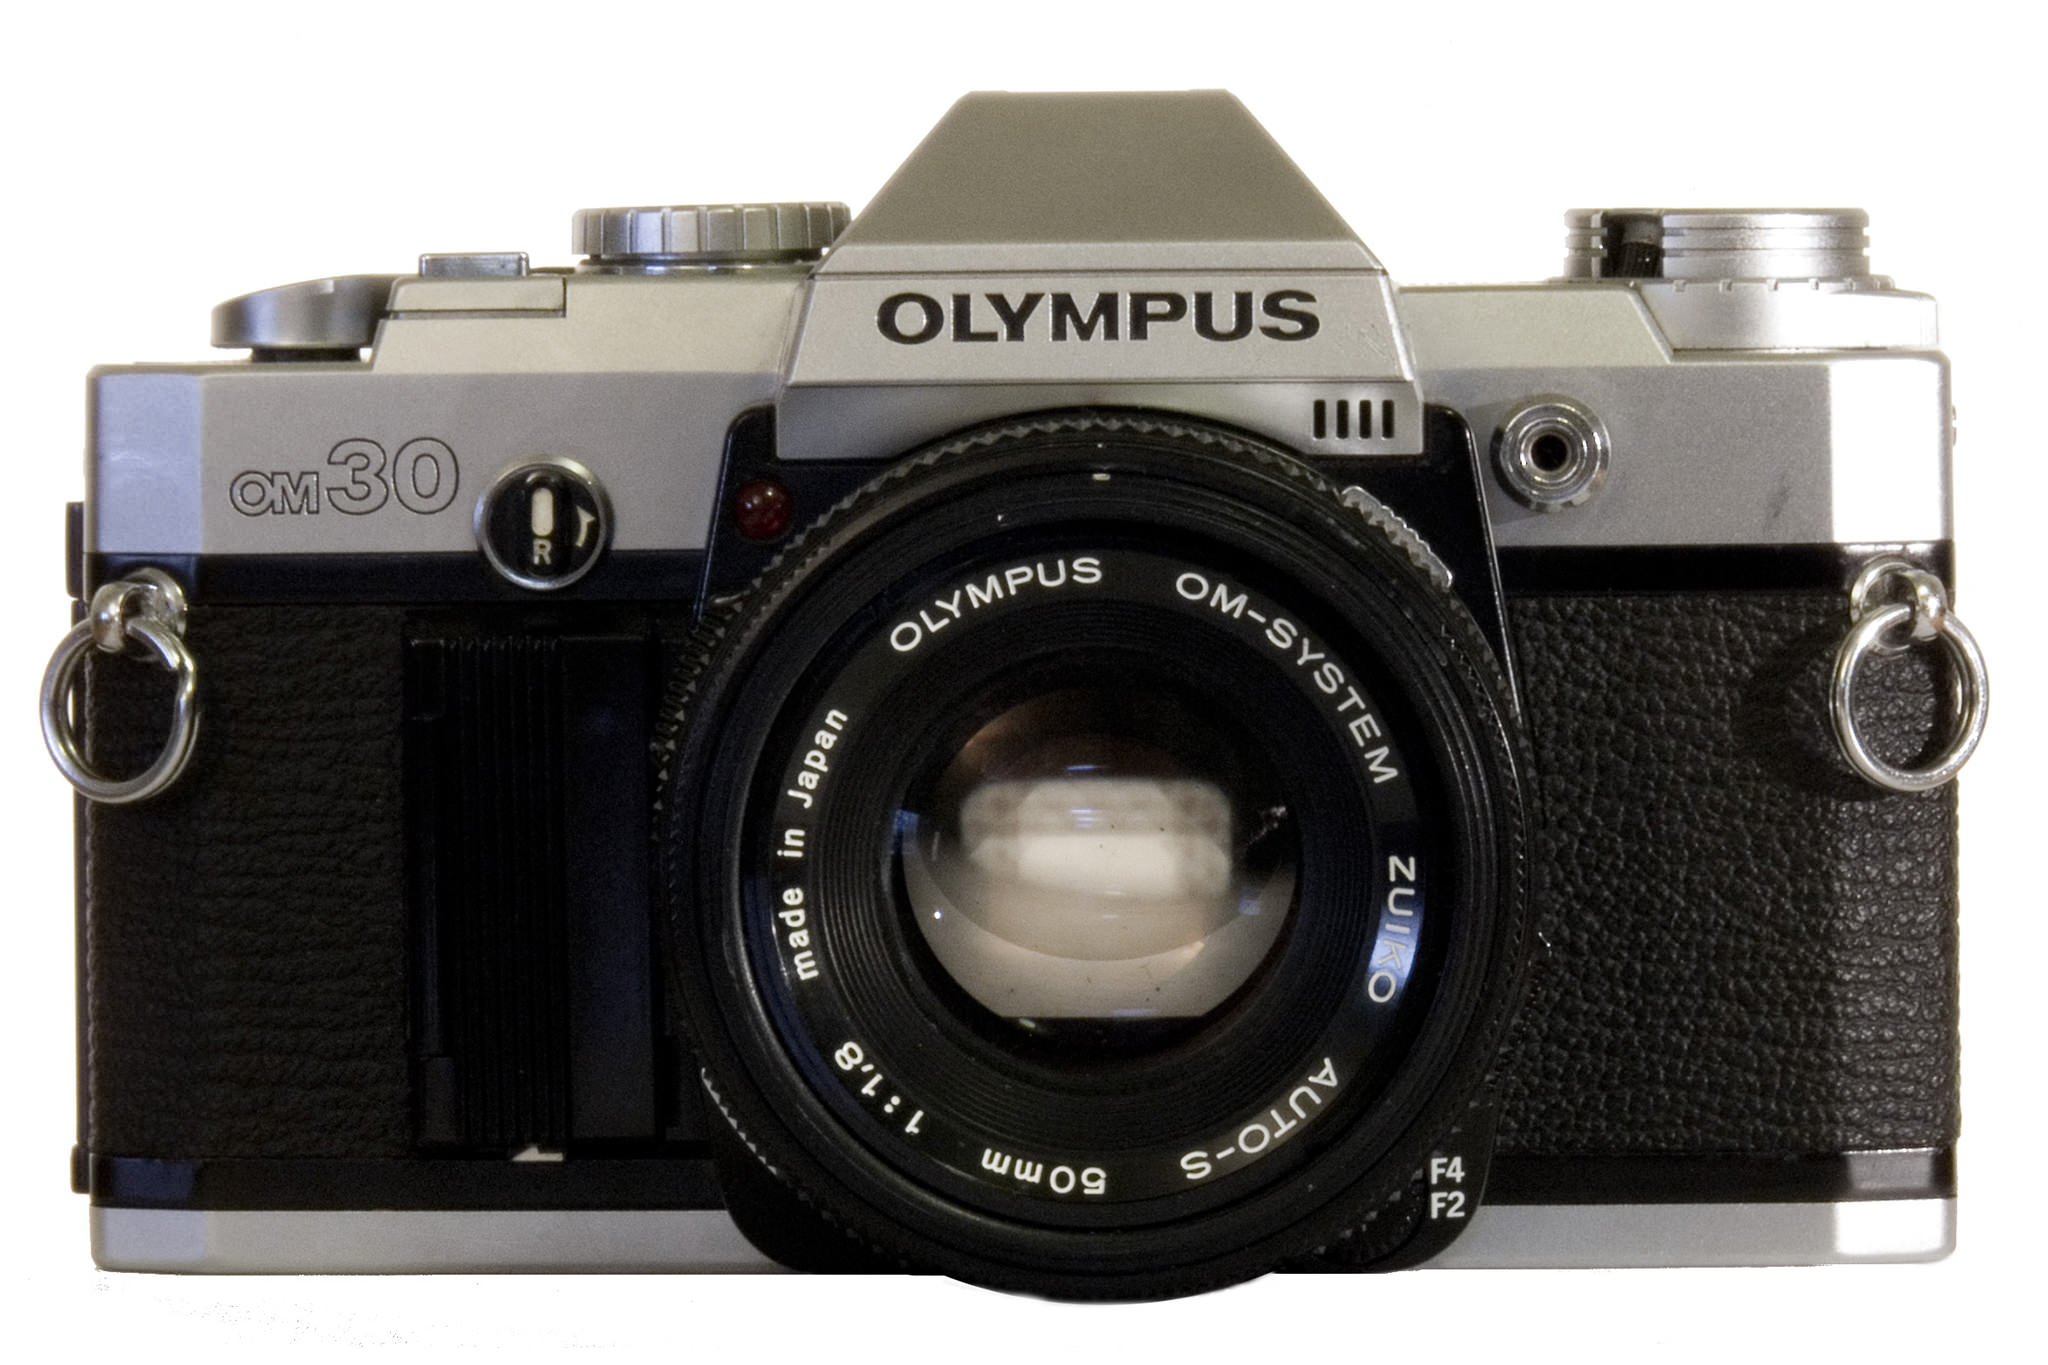 Olympus OM-30 - Functions, History  more about the 35mm SLR camera